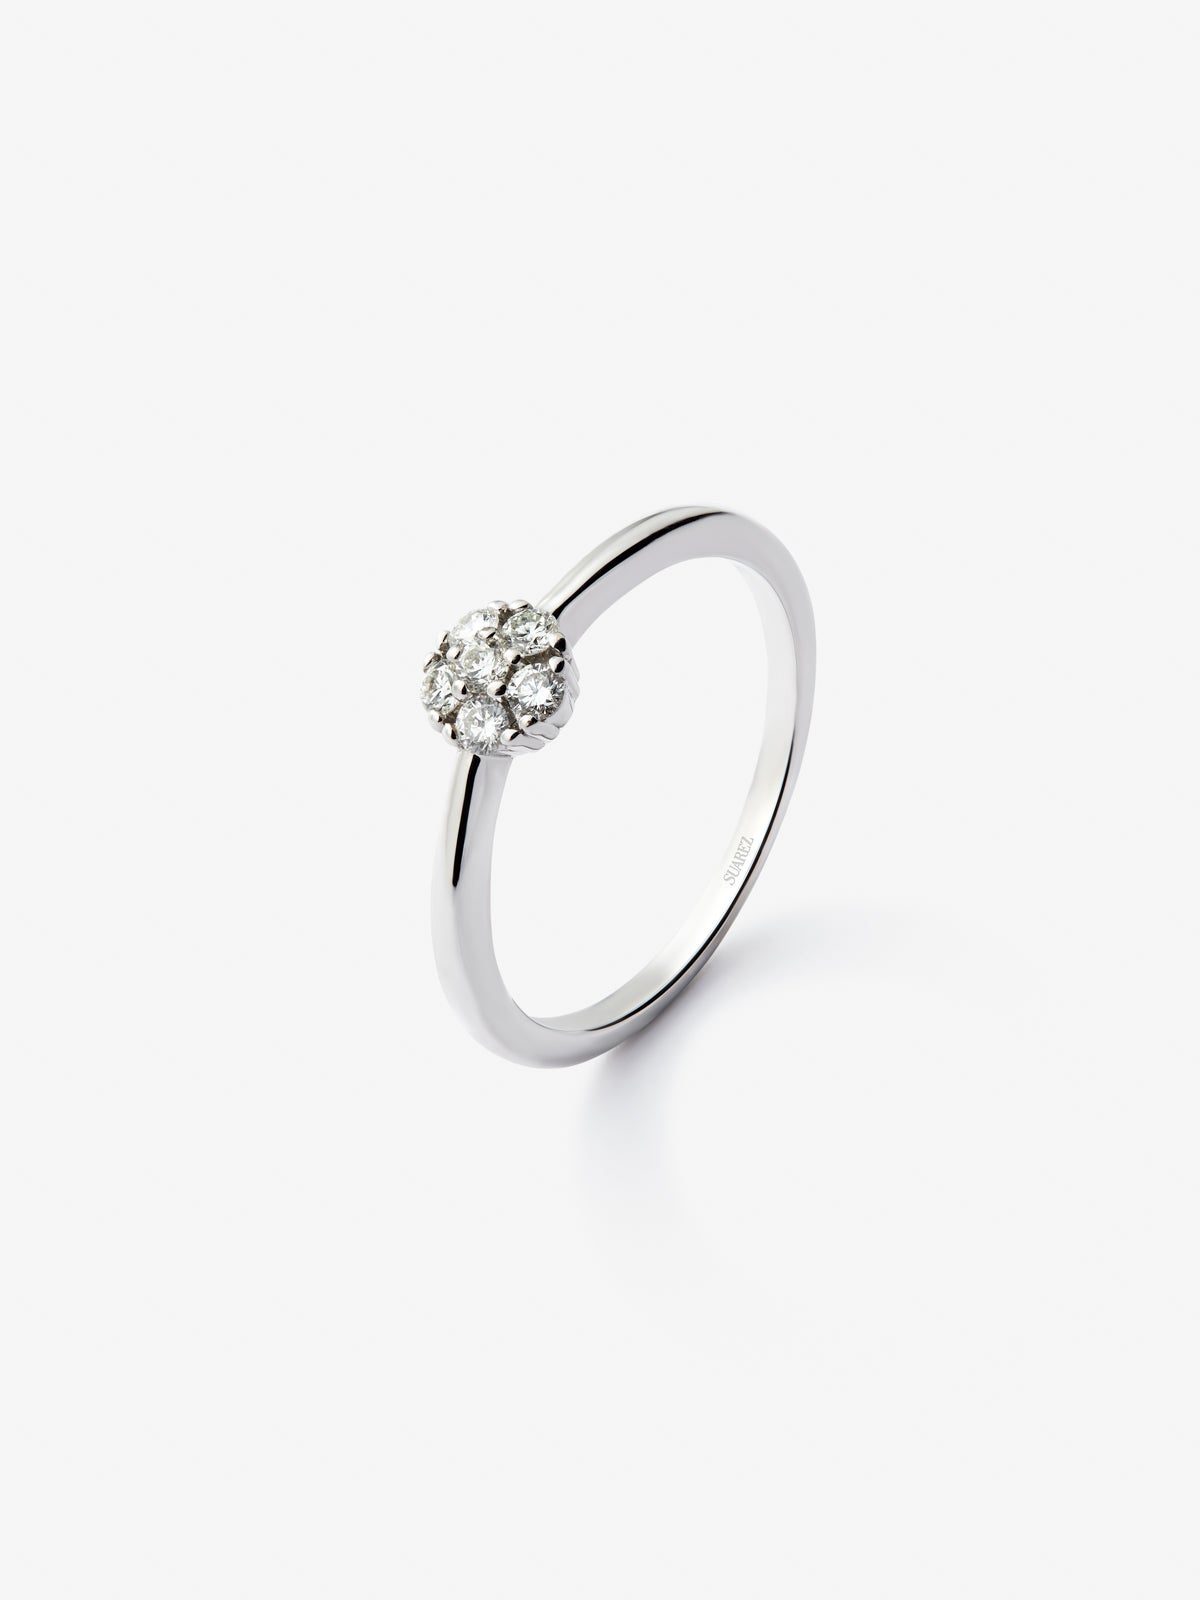 18K white gold ring with rosette of 6 brilliant-cut diamonds with a total of 0.17 cts